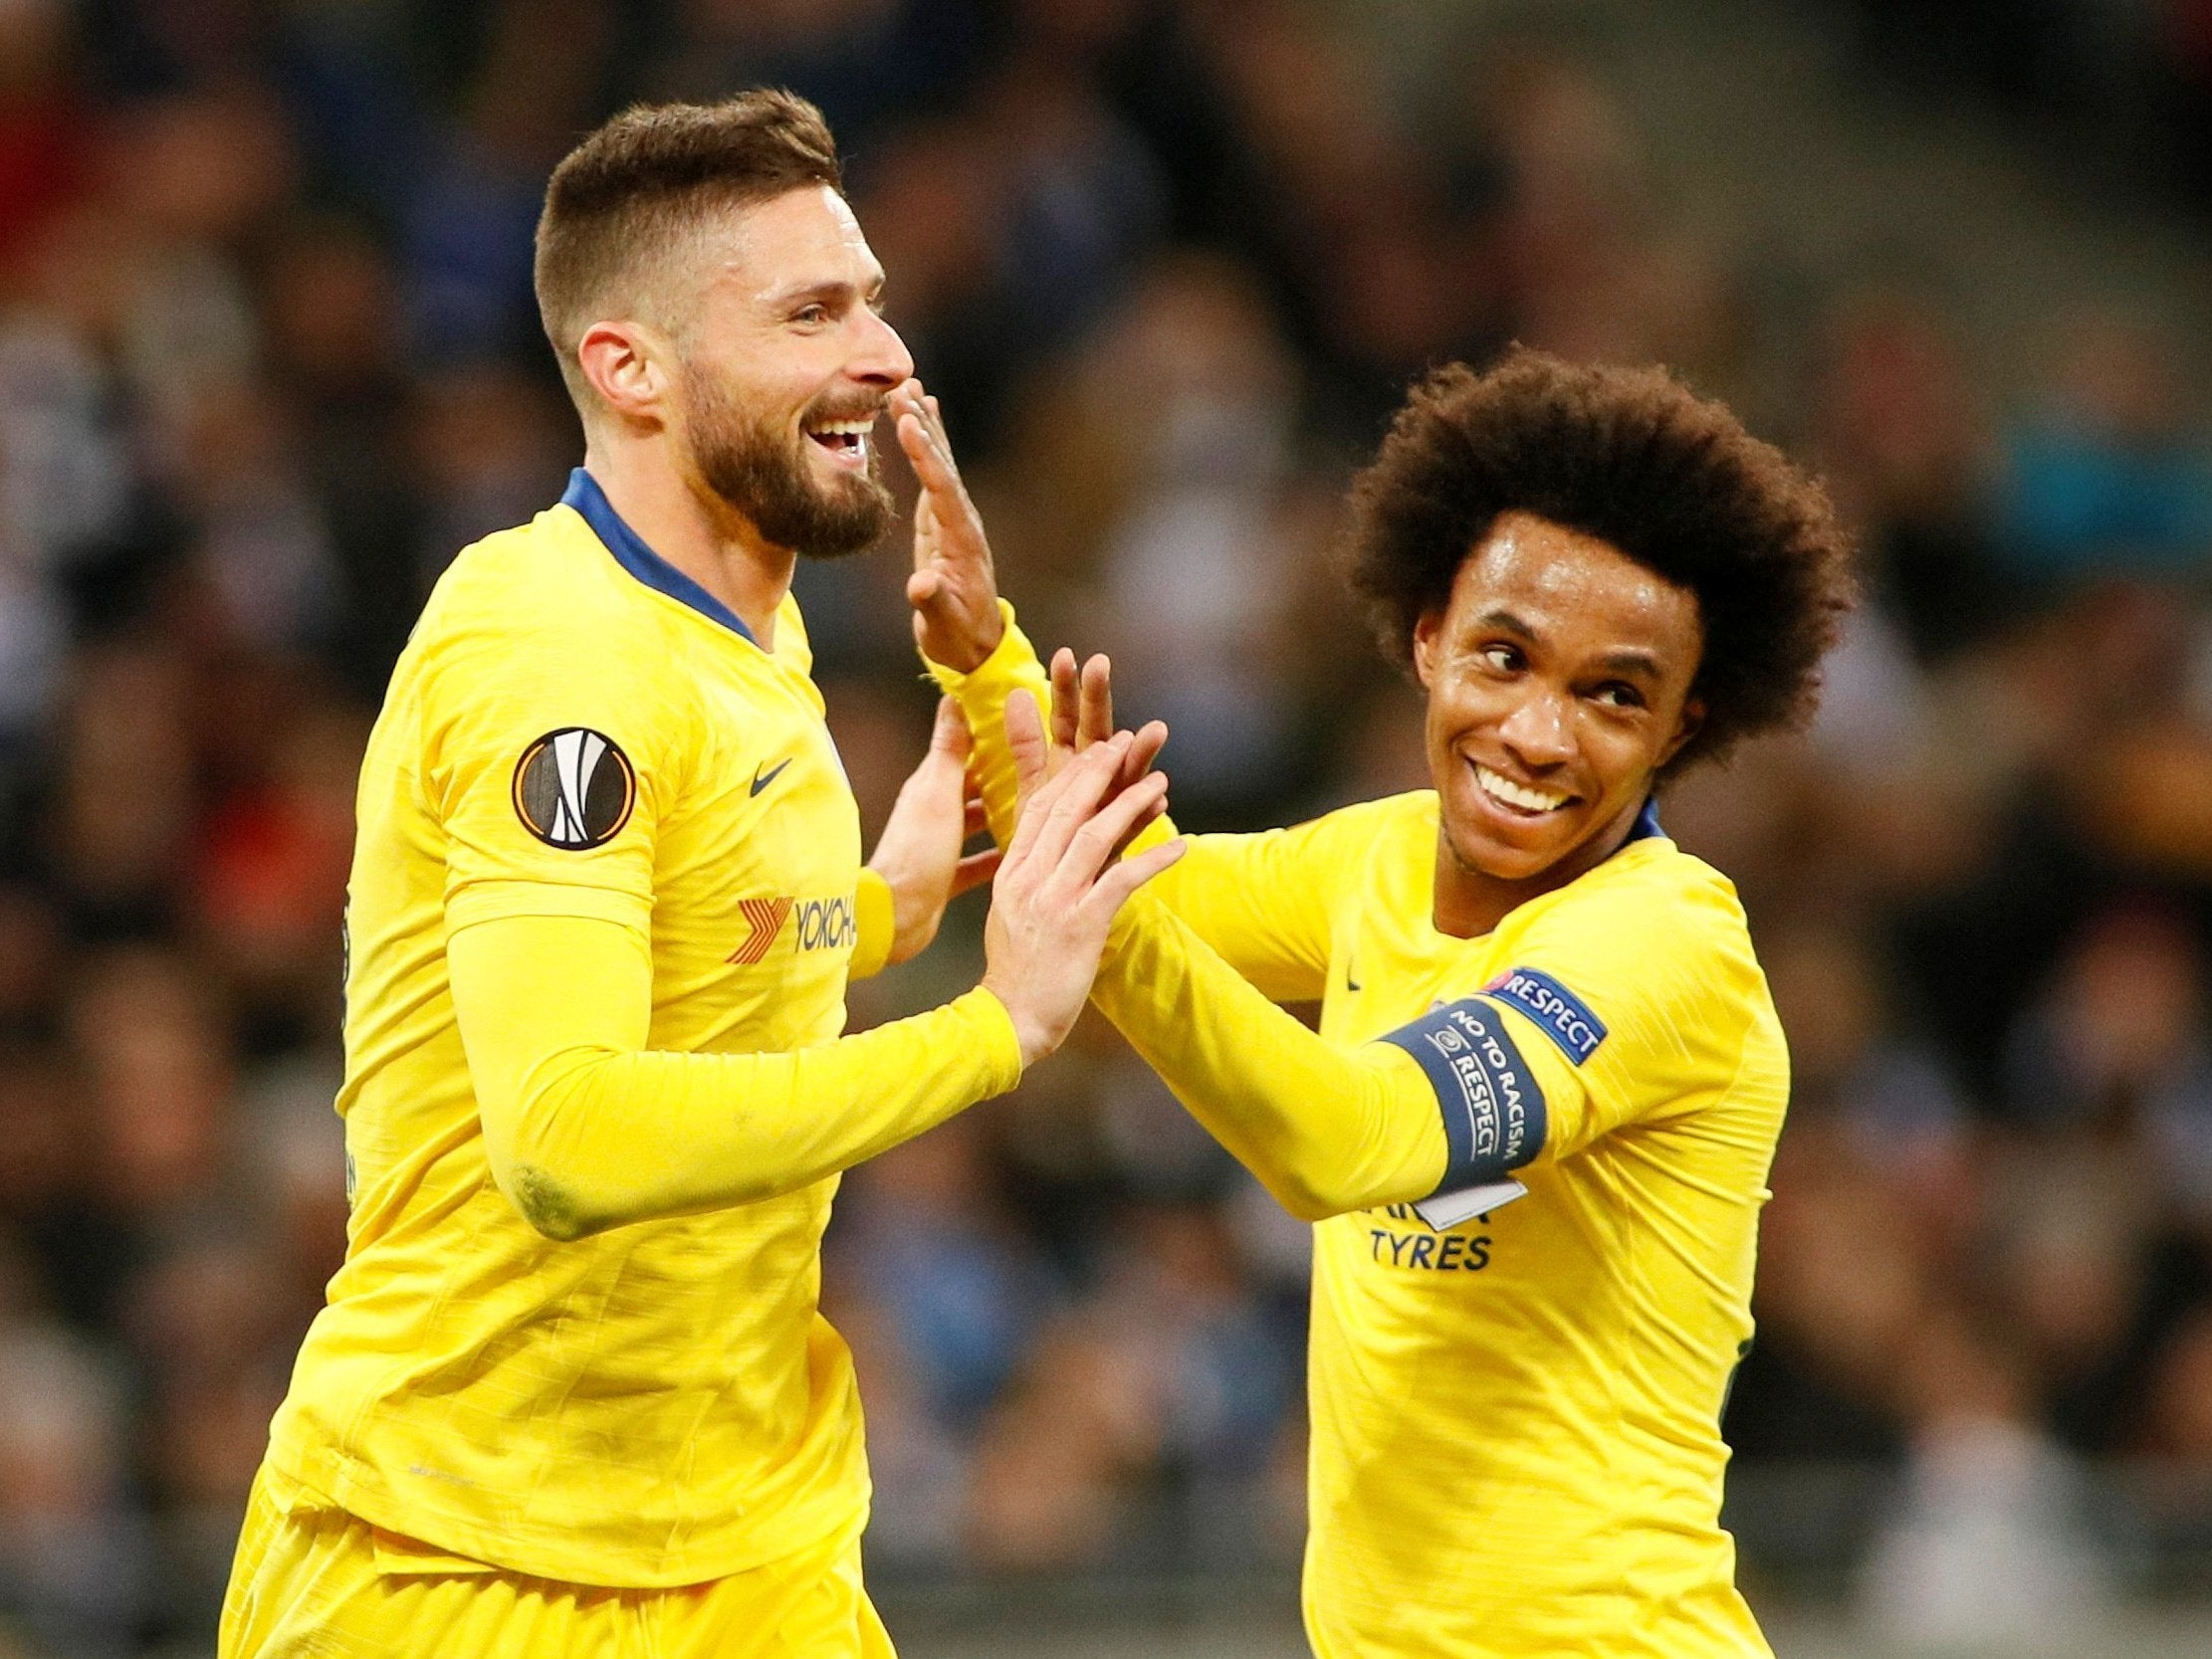 Olivier Giroud celebrates with his team-mate Willian